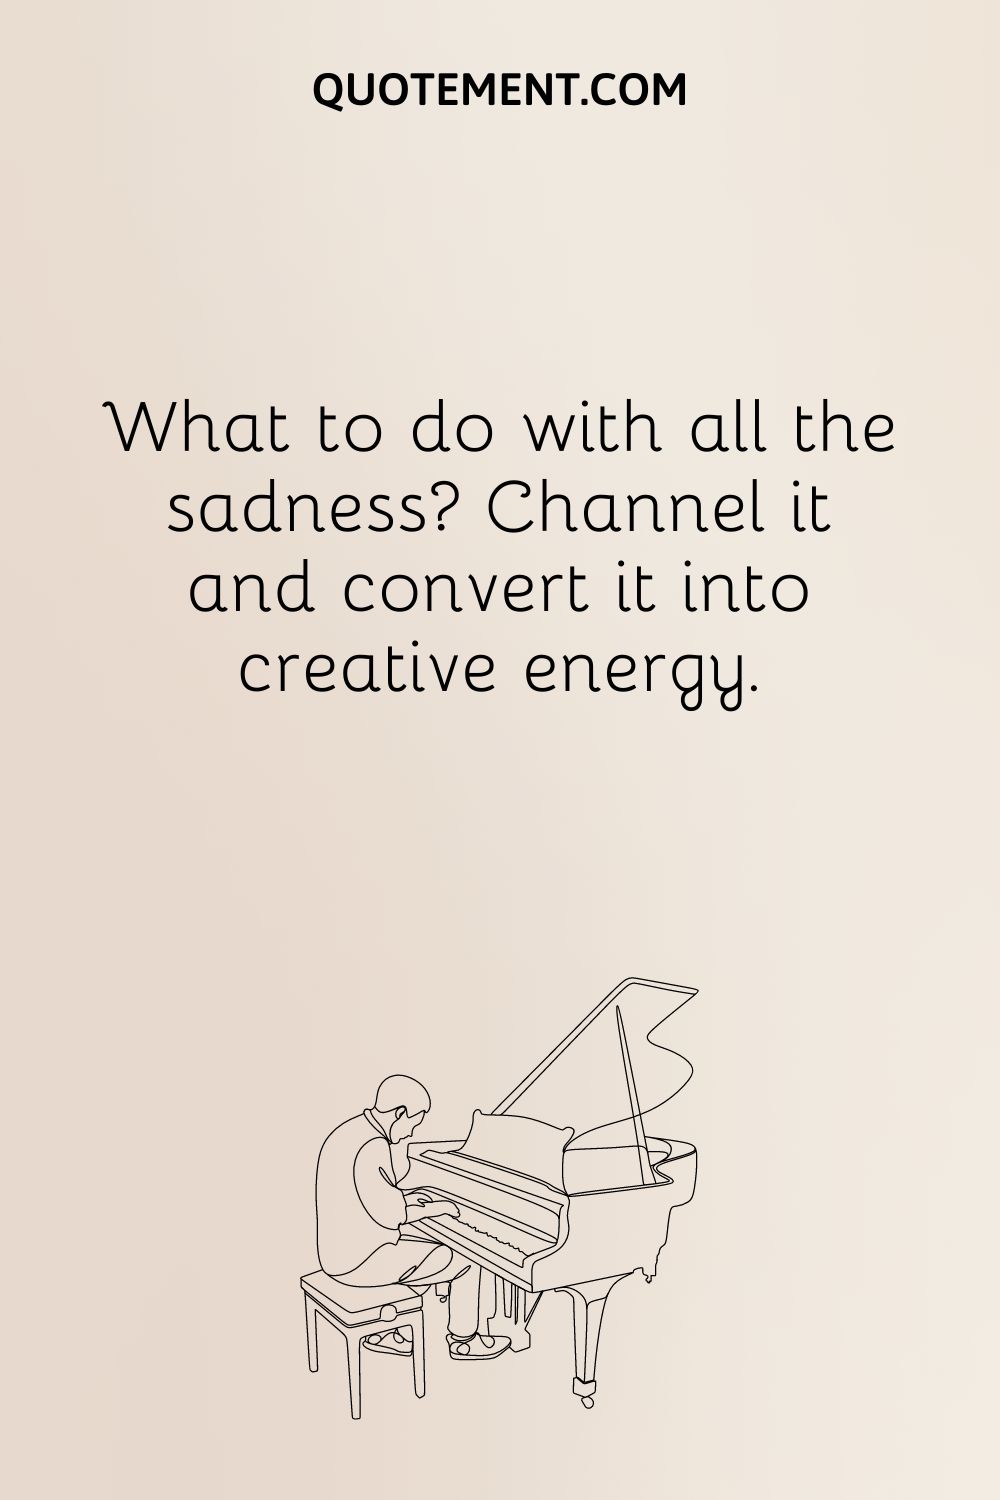 What to do with all the sadness Channel it and convert it into creative energy.